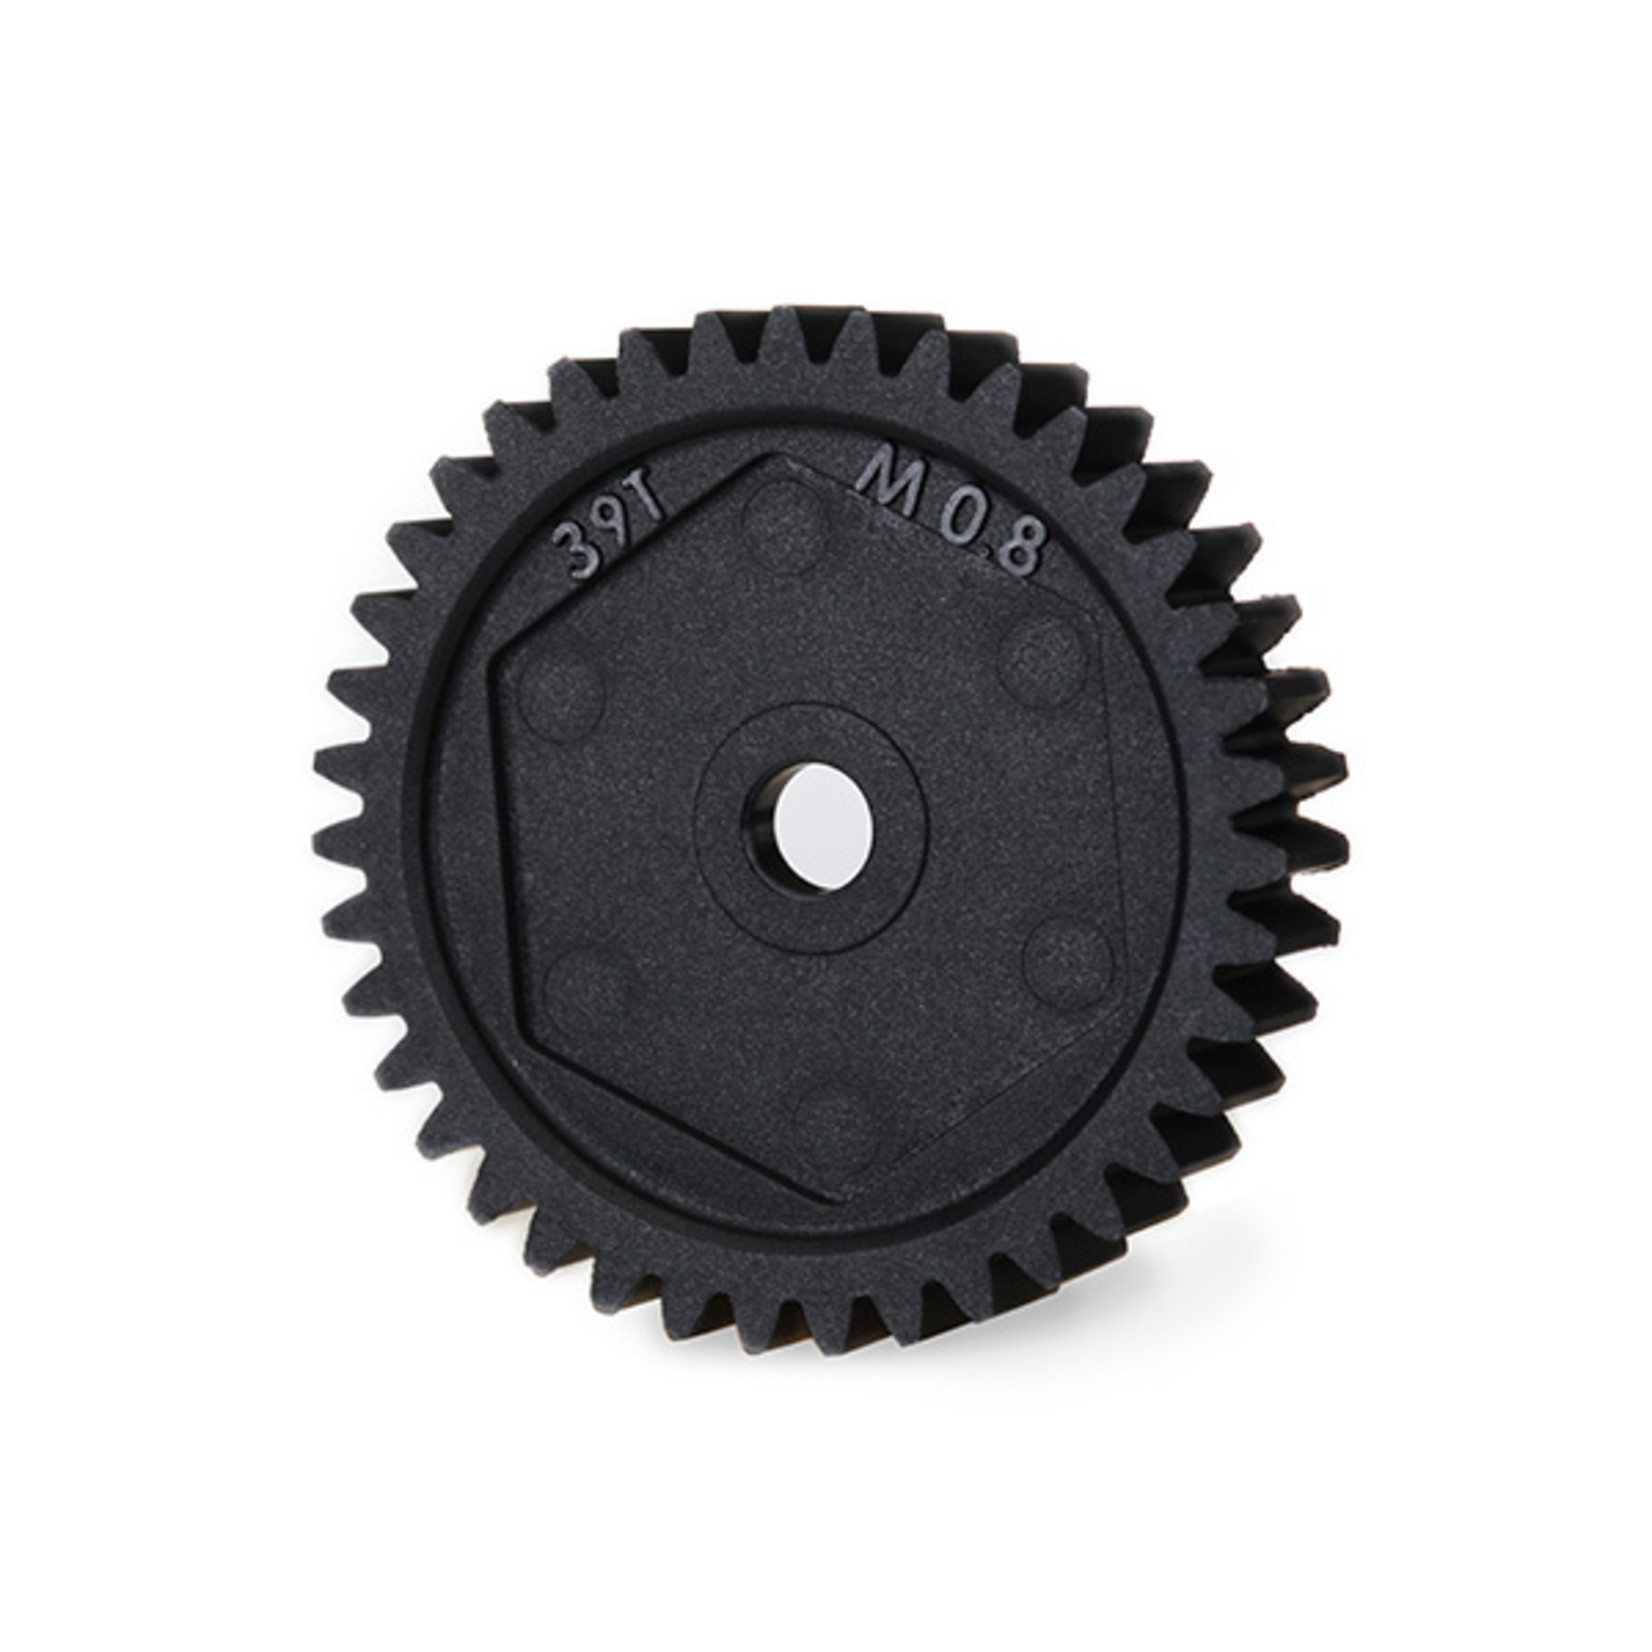 Traxxas 8052 - Spur gear, 39-tooth (32-pitch)